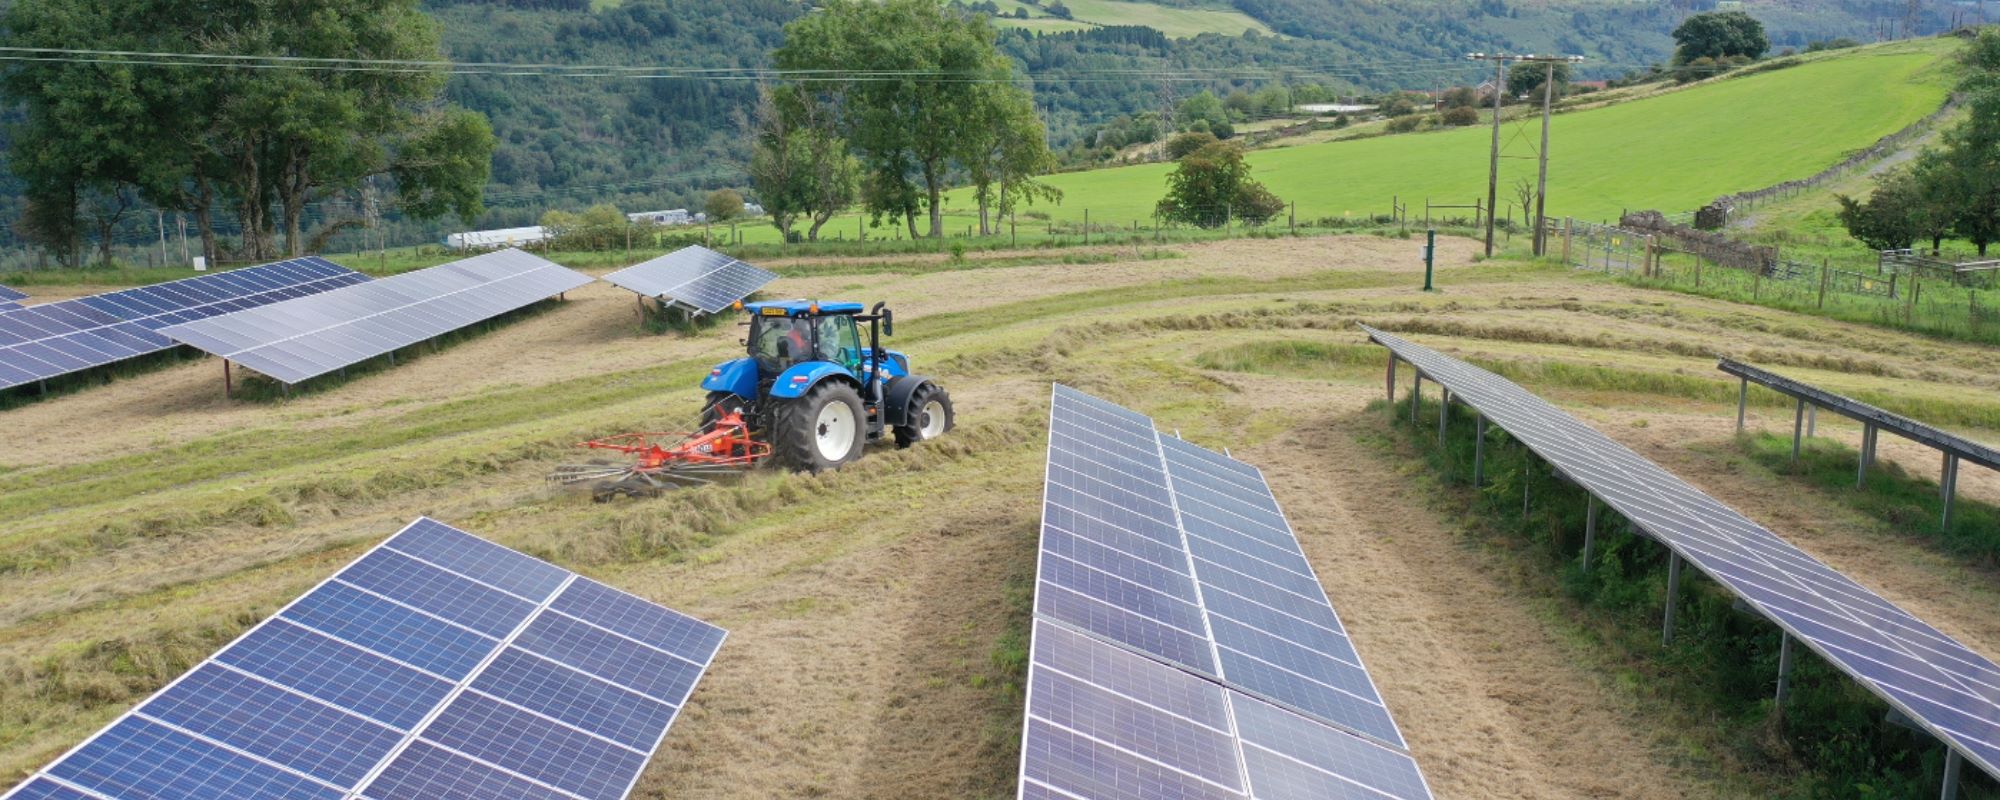 tractor with solar panels